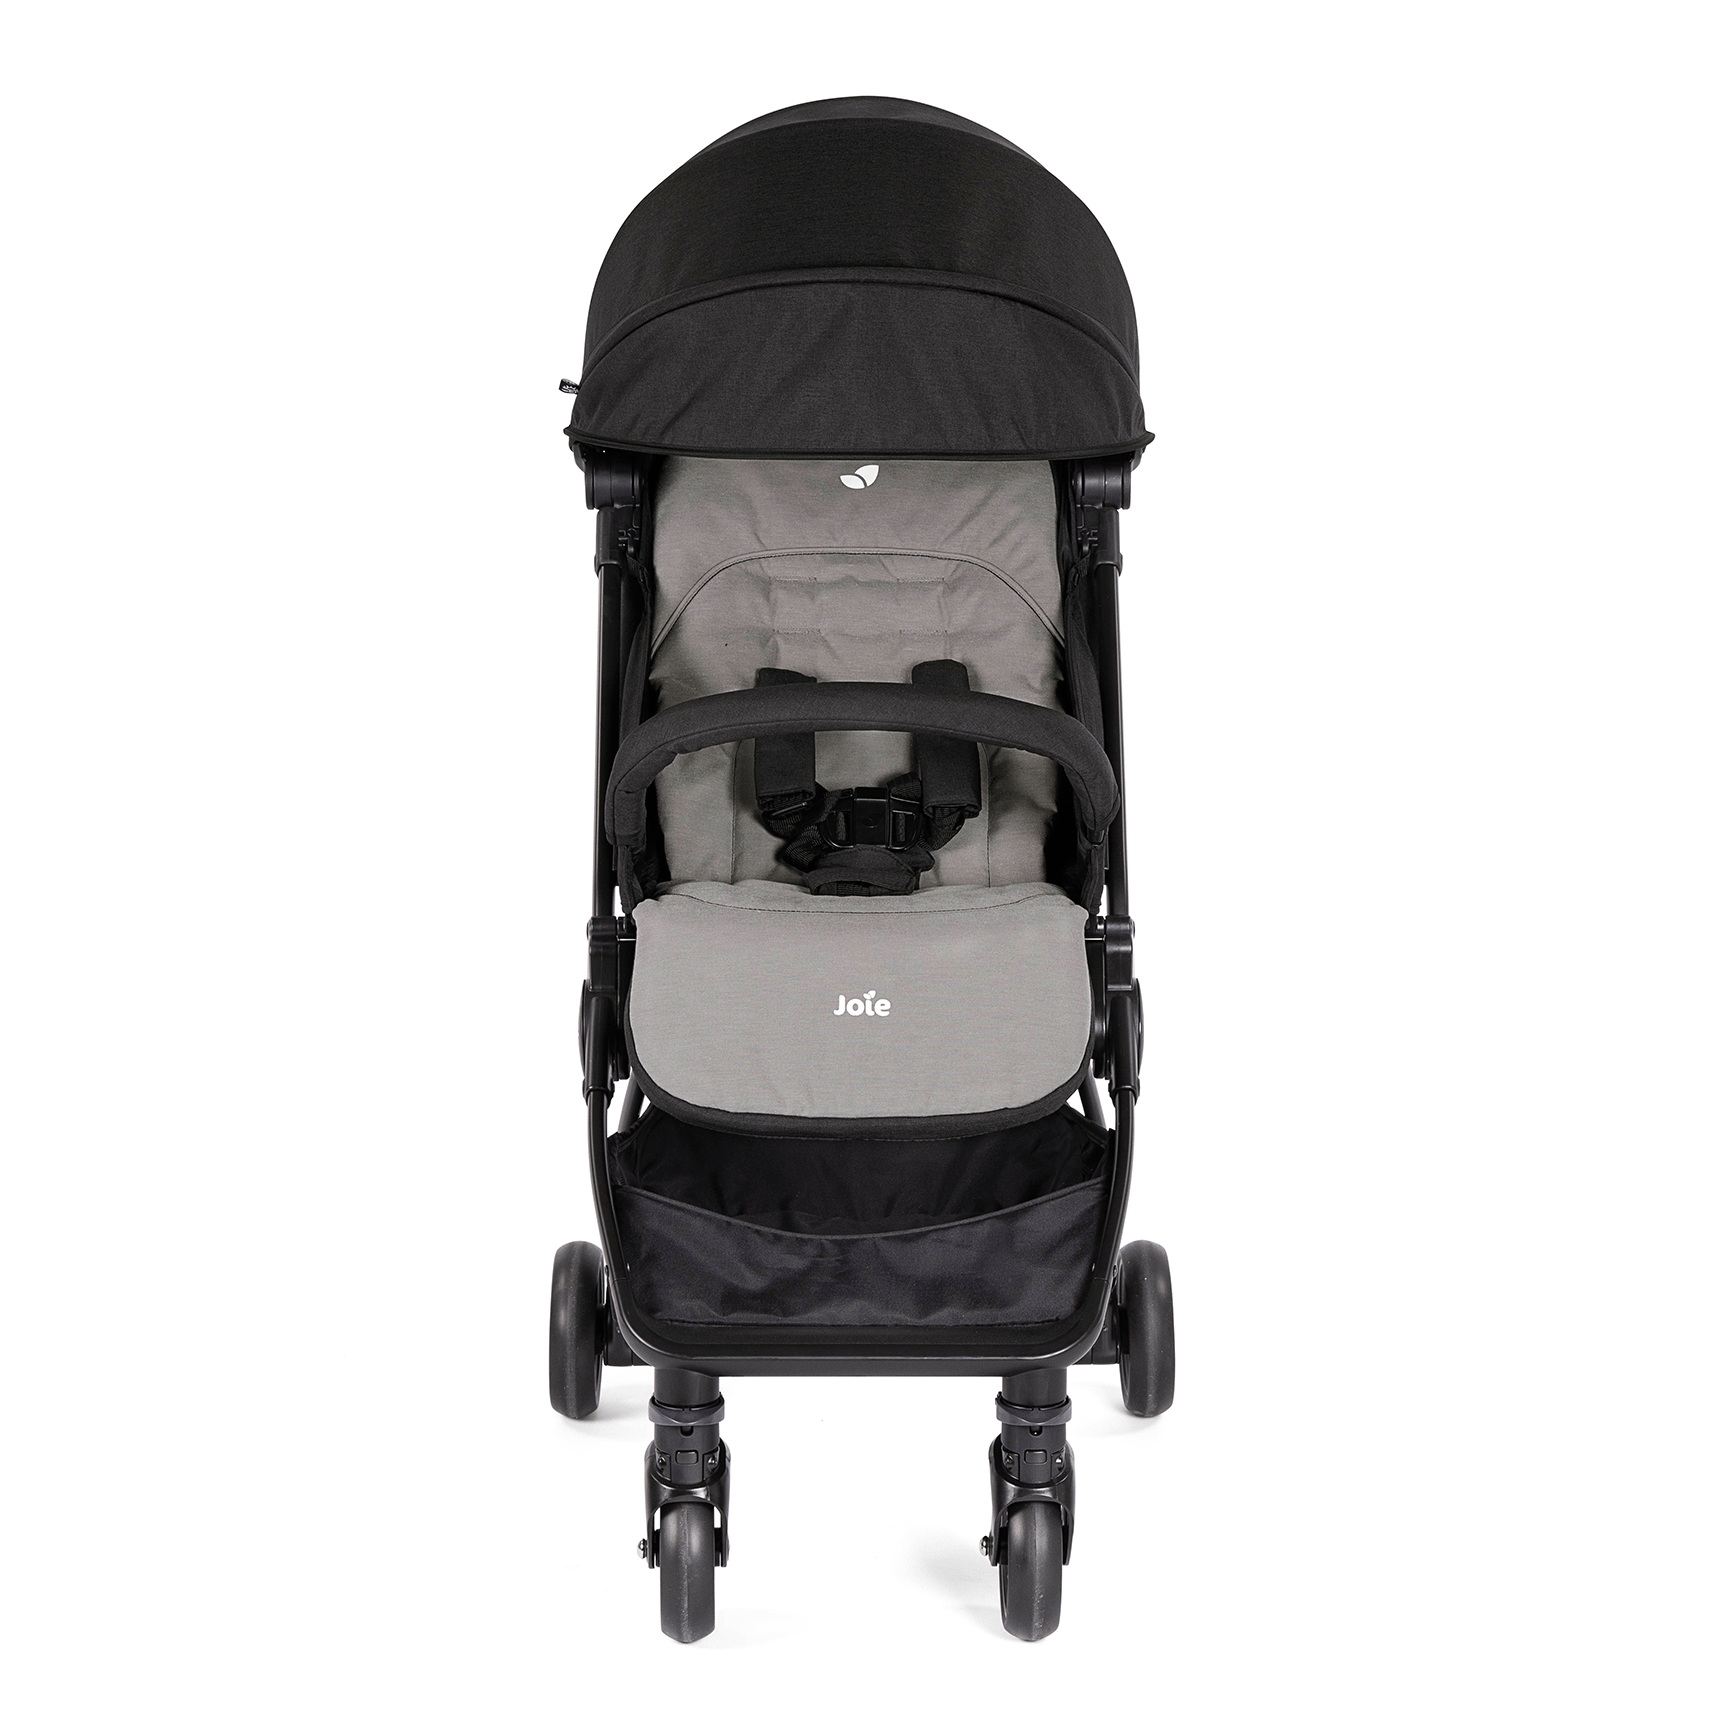 Joie Pushchairs & Buggies Joie Pact Stroller - Ember S1601DAEMB000